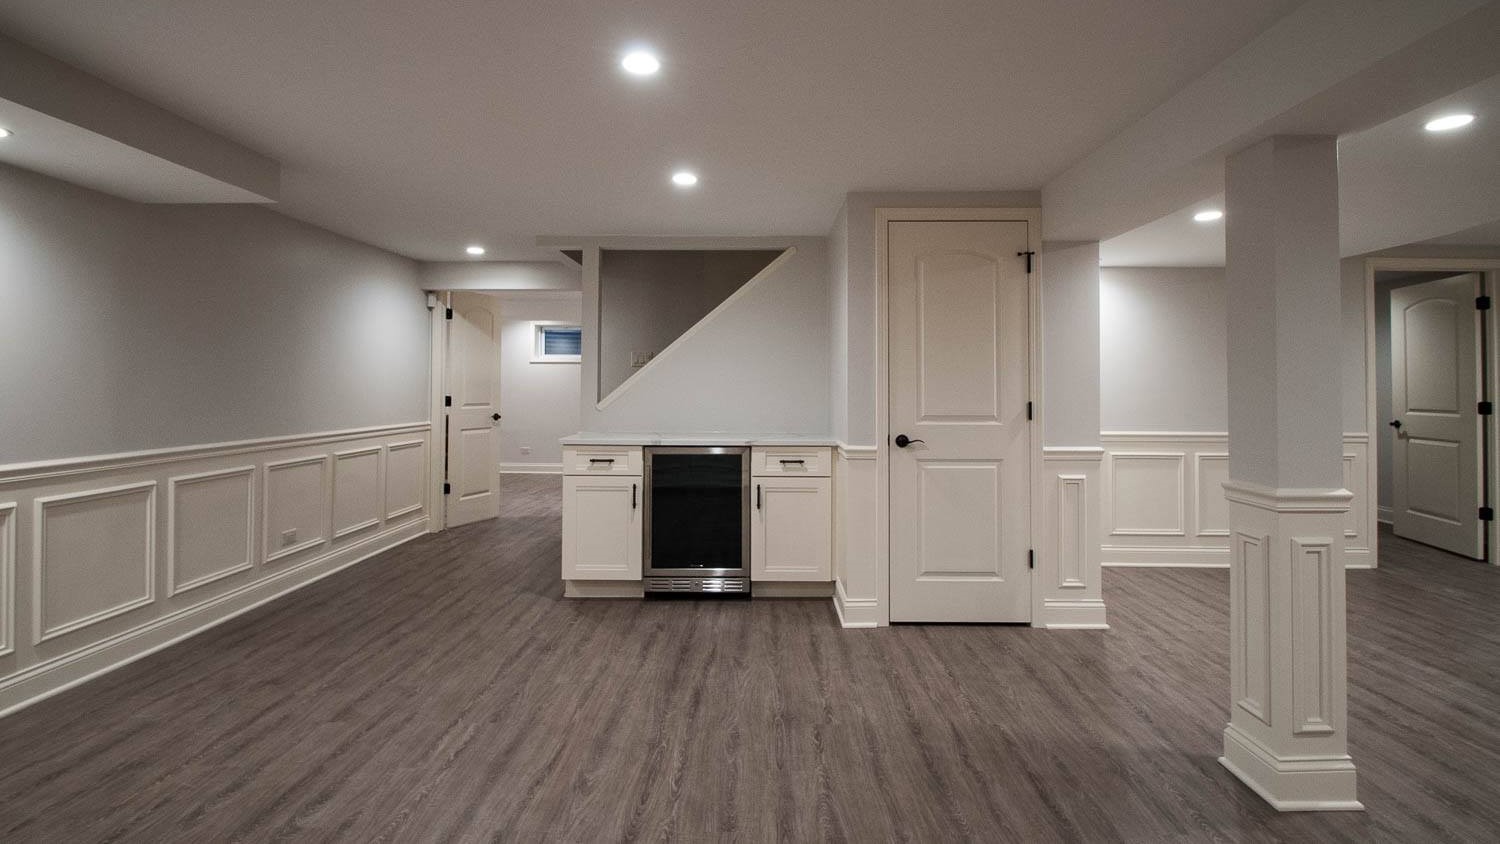 Newly remodeled basement with beautiful wood flooring and mini kitchen in Oak Park, IL by 4Ever Remodeling